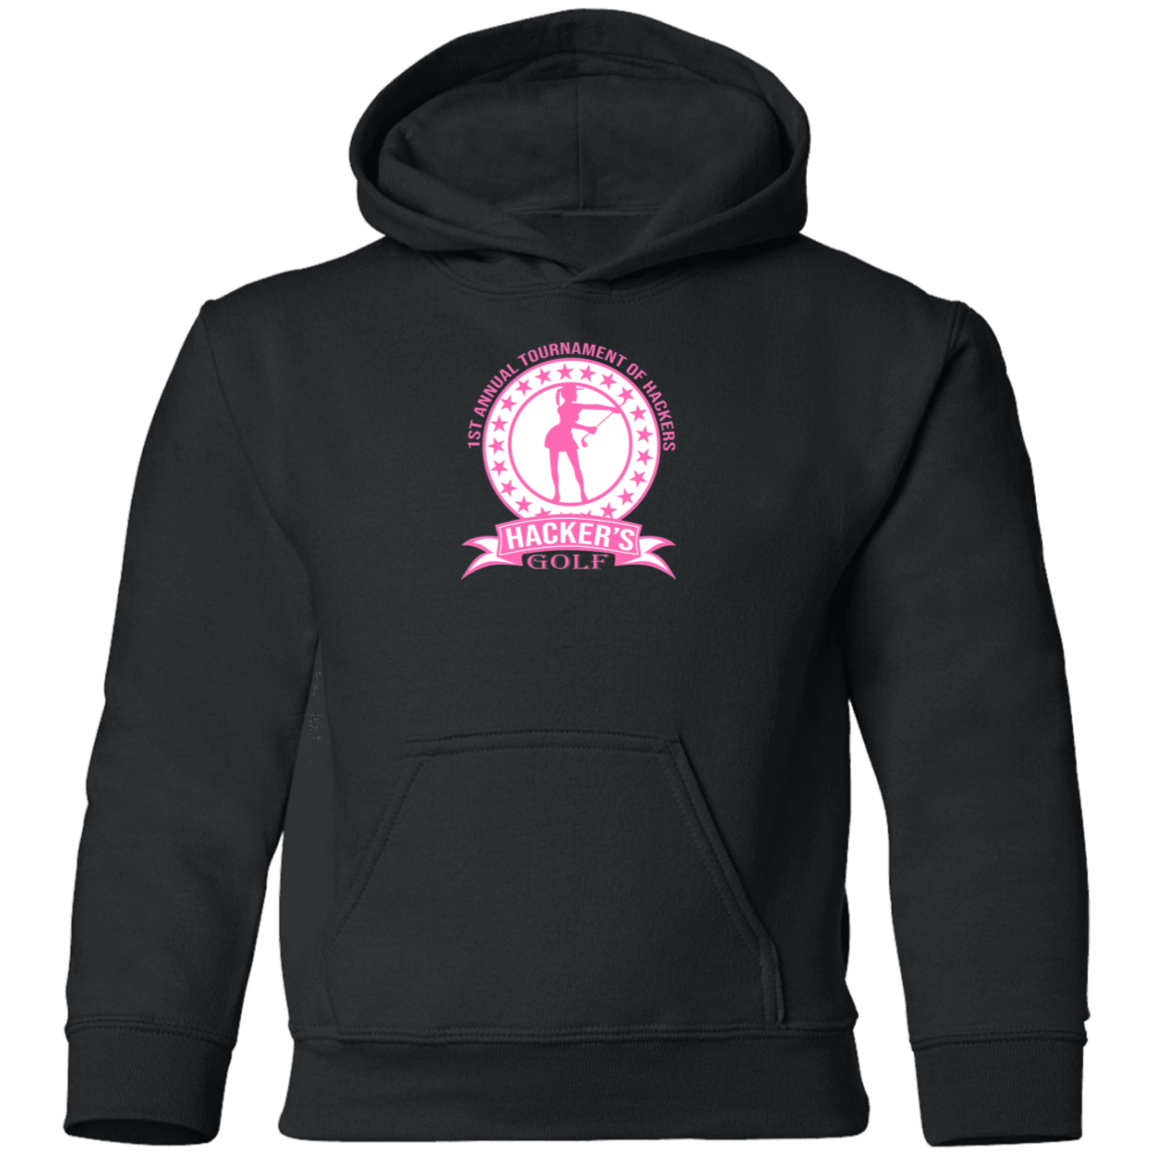 ZZZ#20 OPG Custom Design. 1st Annual Hackers Golf Tournament. Ladies Edition. Youth Pullover Hoodie